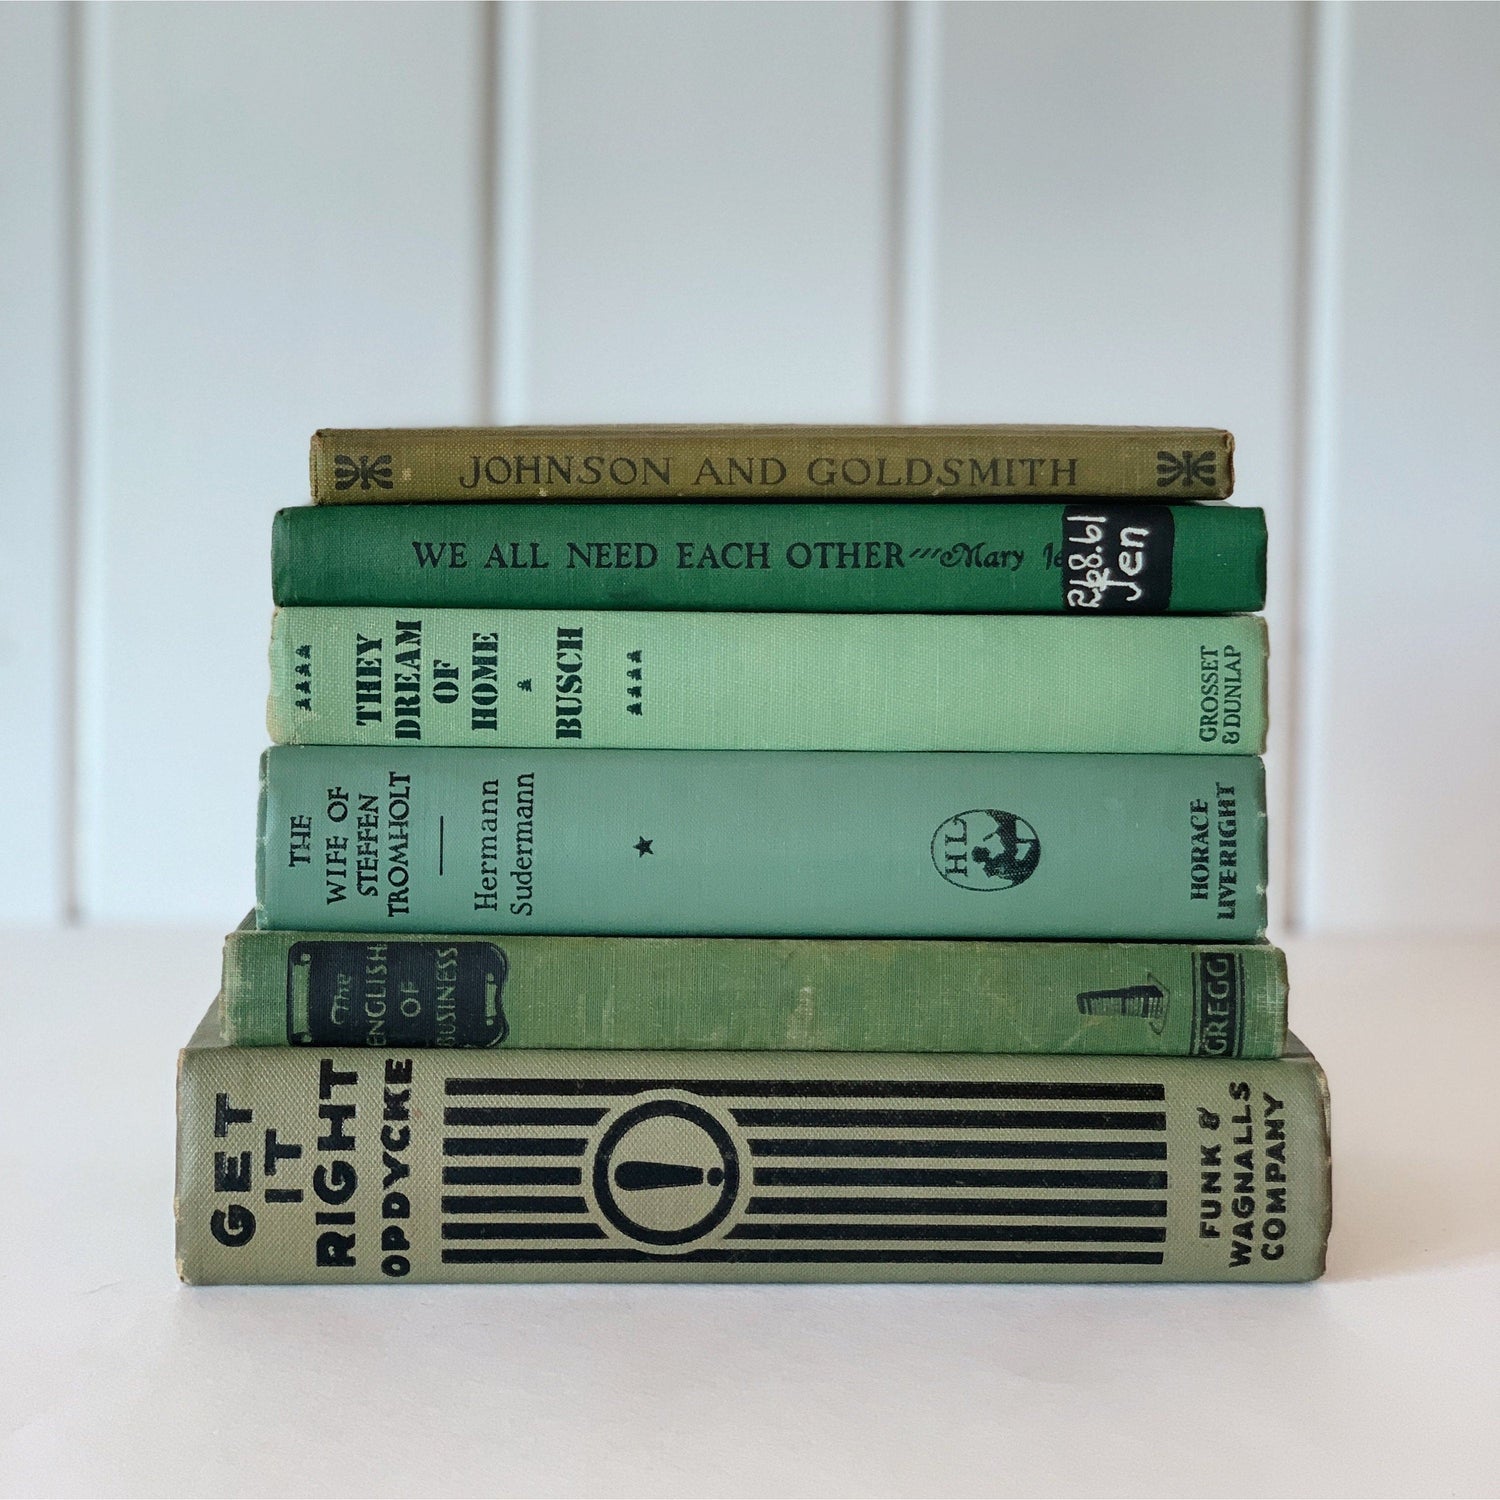 Vintage Green and Black Decorative Books for Display, Farmhouse Decor, Shelf Styling, Books By Color